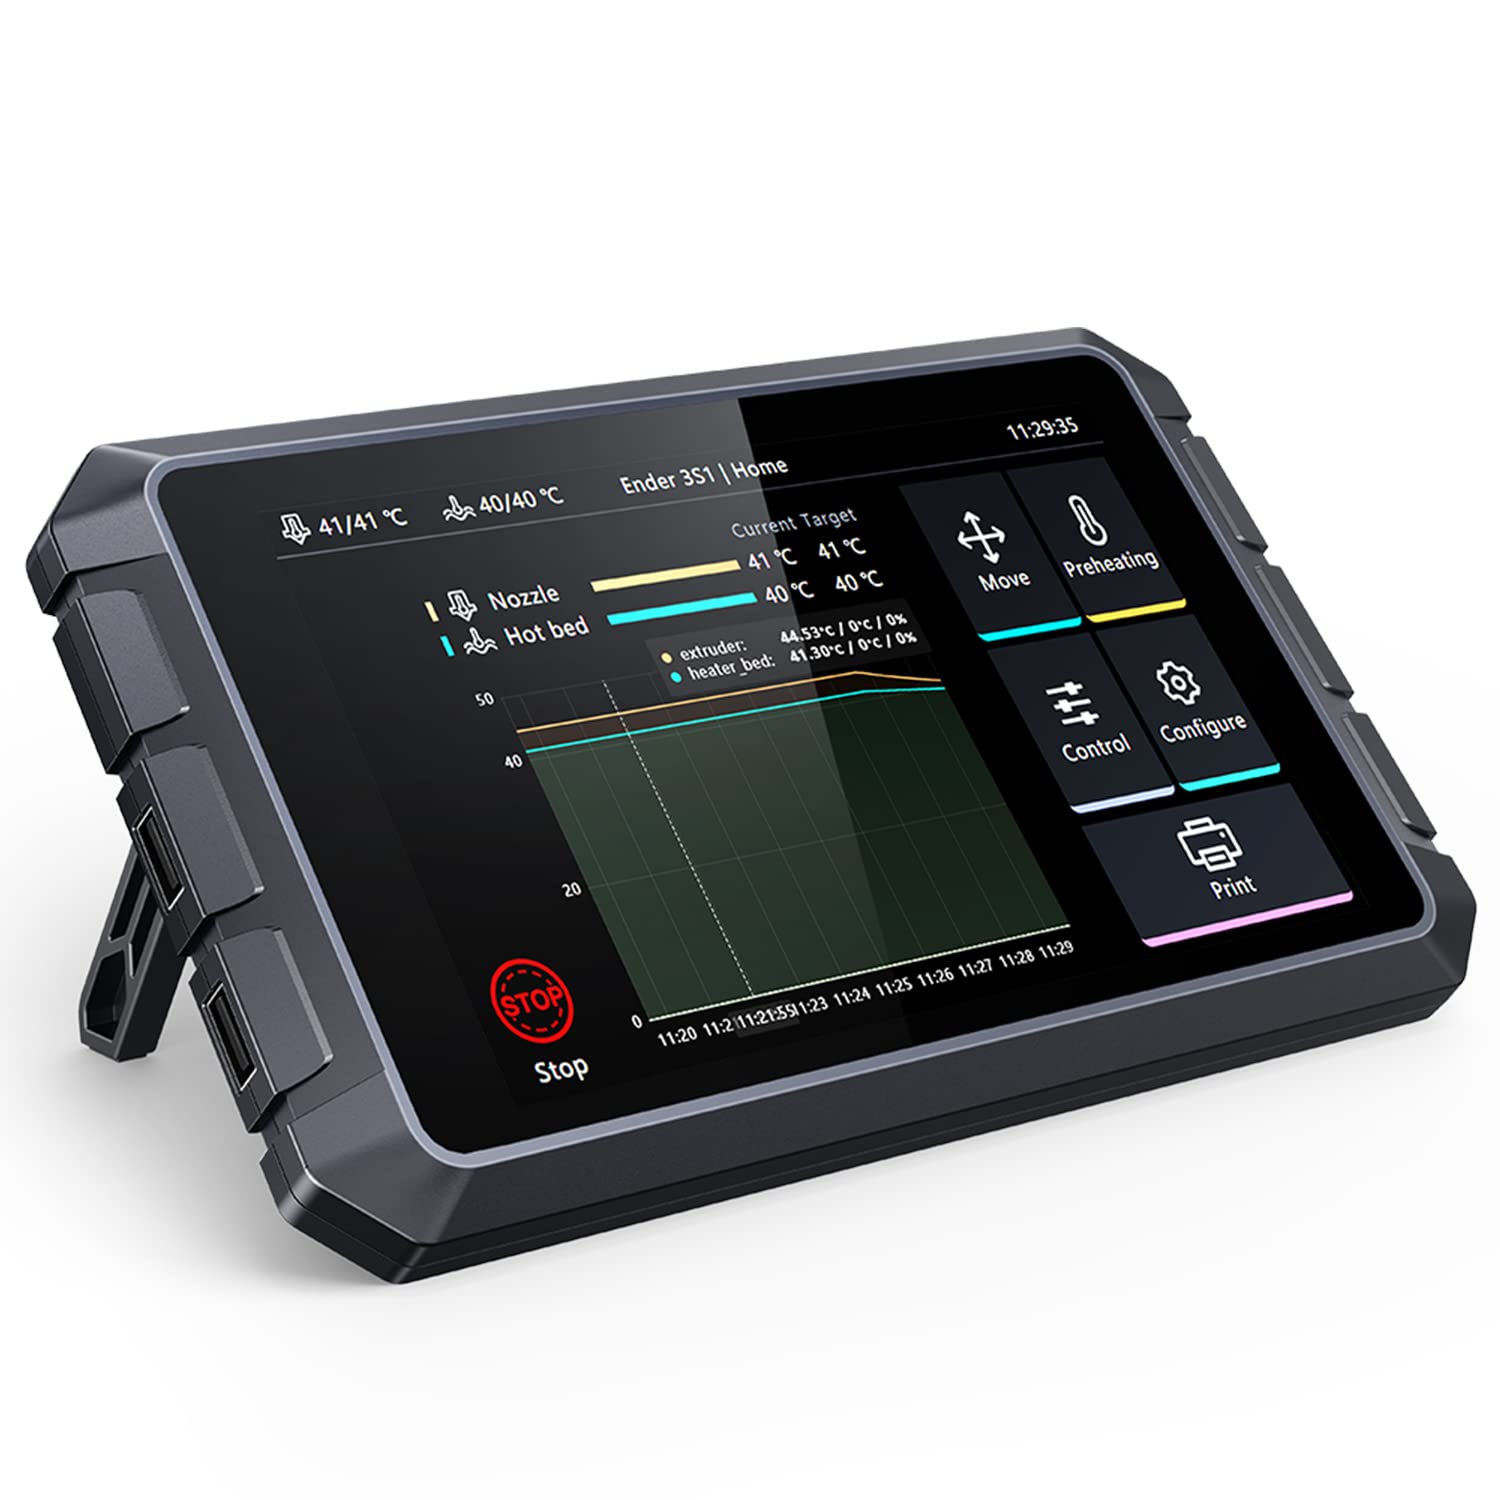 Creality Sonic Pad Klipper, 7 Inch Touch Screen 3D [...]